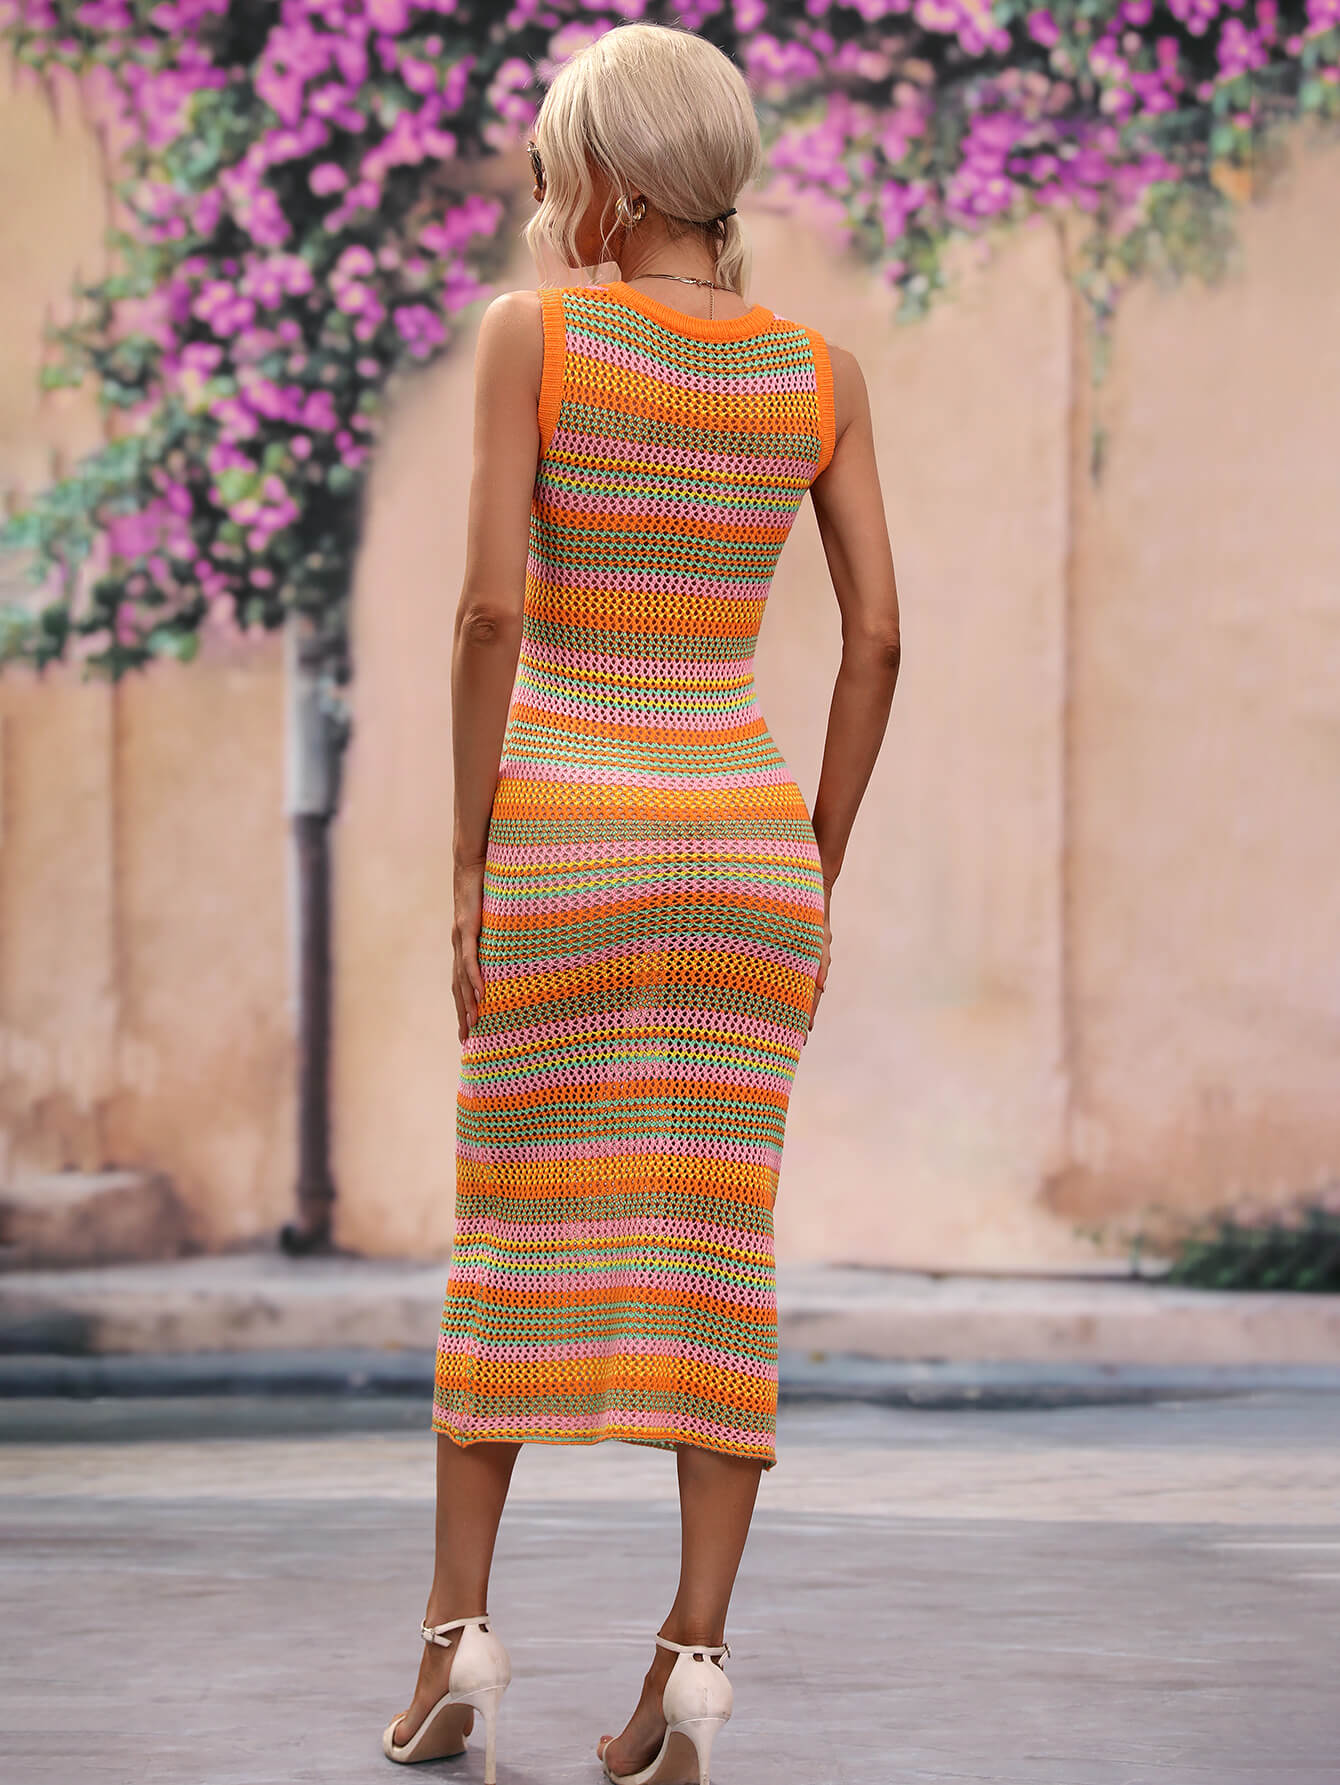 Striped Round Neck Sleeveless Midi Cover Up Dress - Coco and lulu boutique 